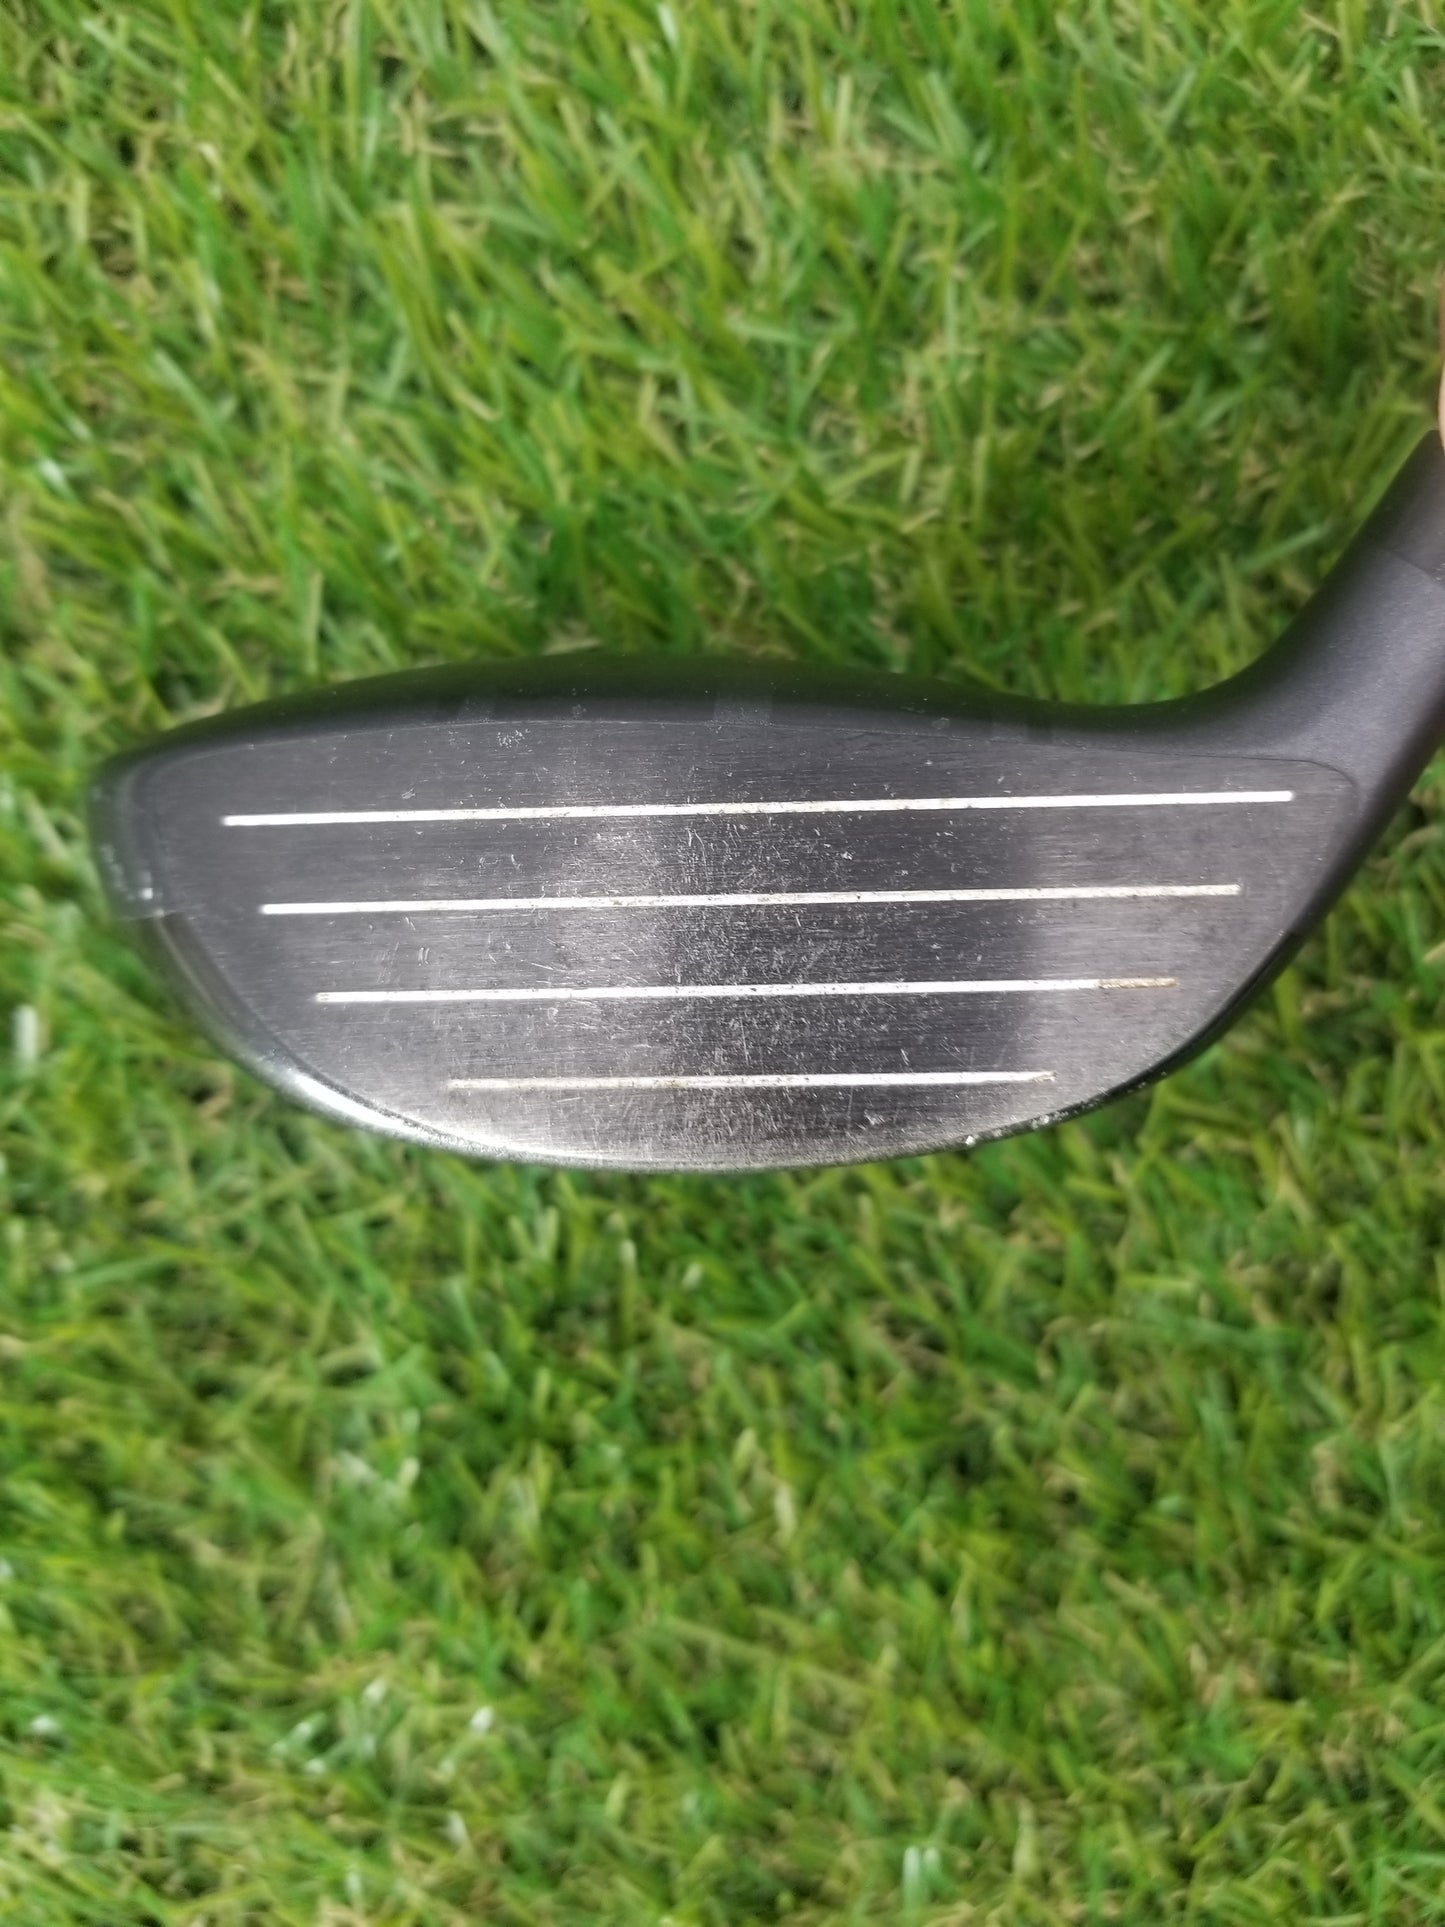 2014 PING I25 5 WOOD 18* CLUBHEAD ONLY FAIR